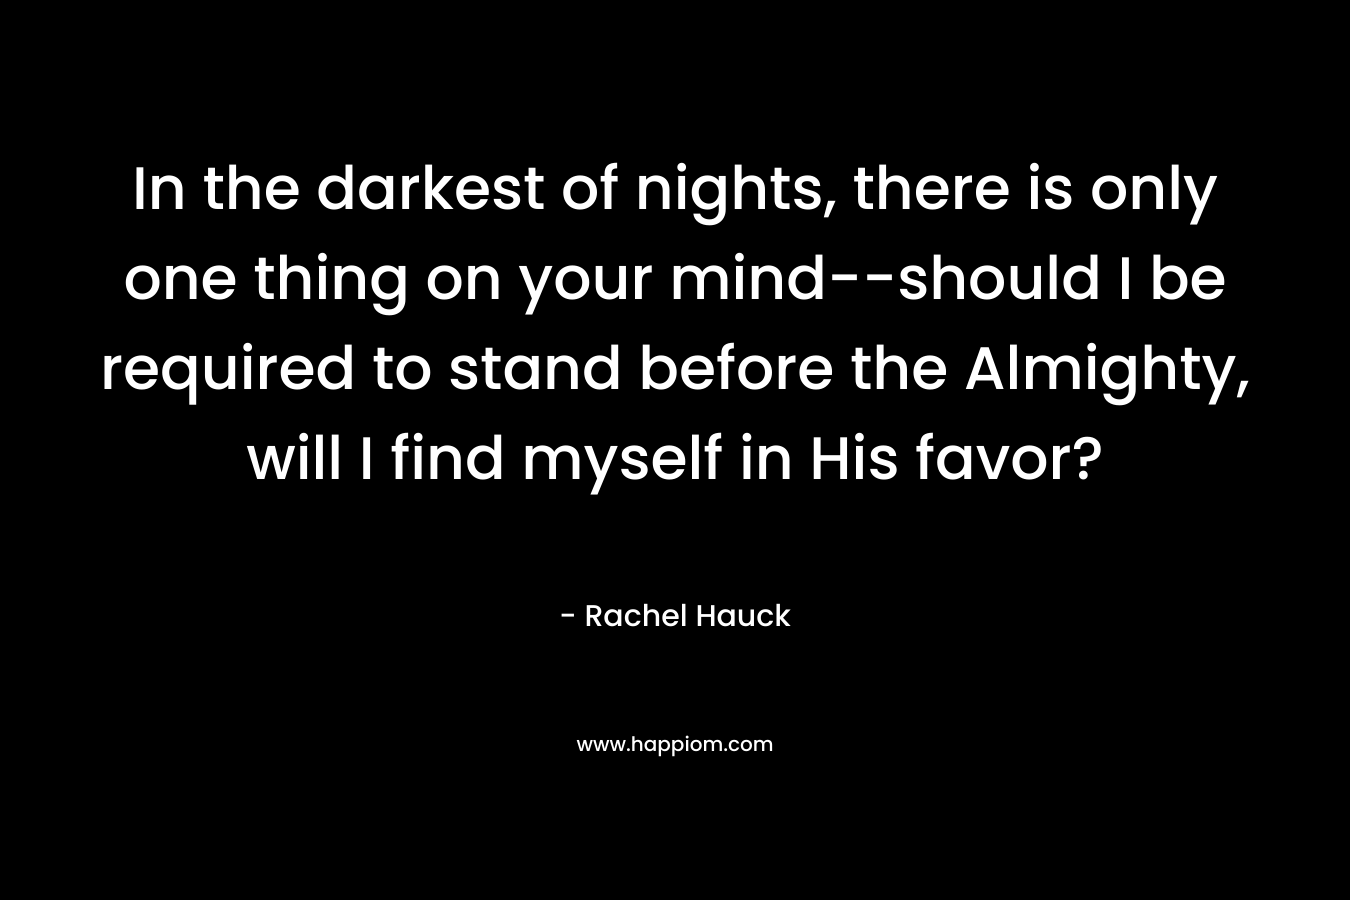 In the darkest of nights, there is only one thing on your mind–should I be required to stand before the Almighty, will I find myself in His favor? – Rachel Hauck